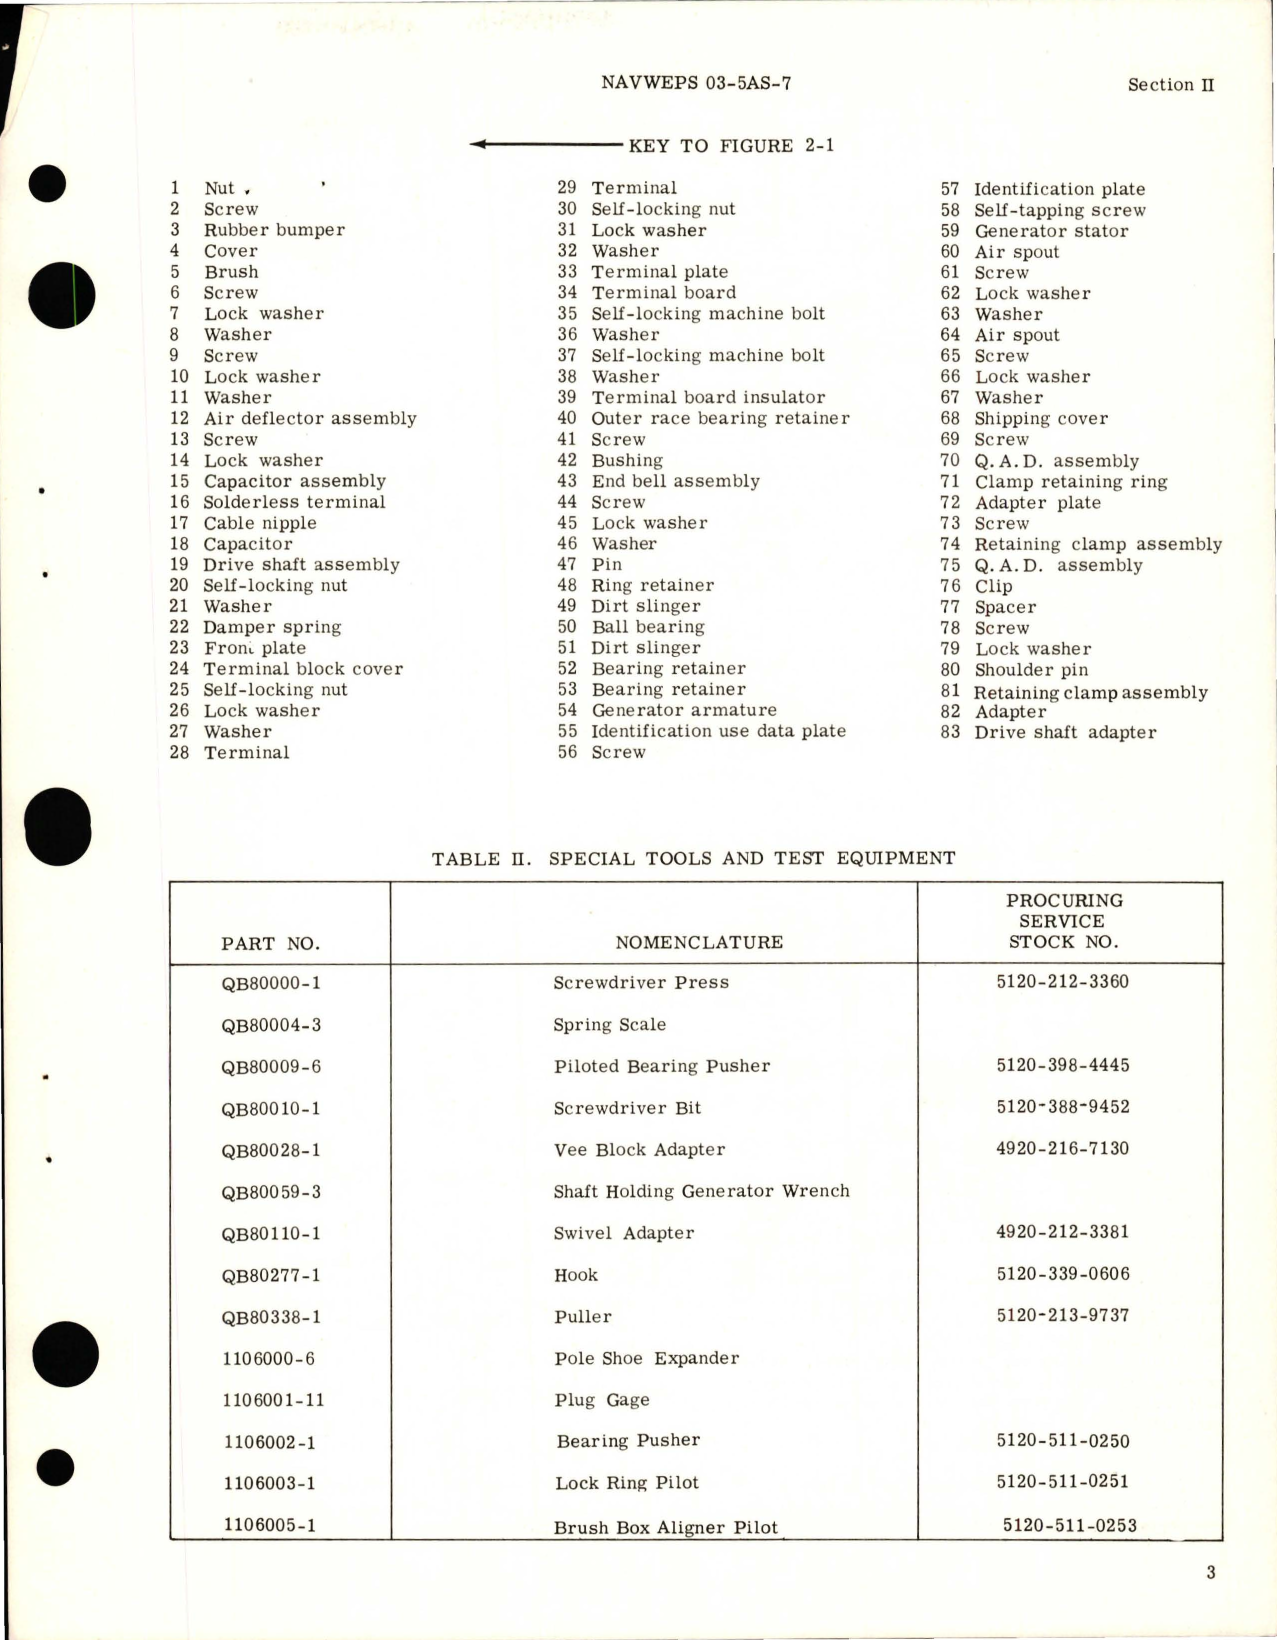 Sample page 7 from AirCorps Library document: Overhaul Instructions for Direct Current Generator (Starter Generator) Types 30B37-3-A, 30B37-15-A, 30B37-17-A